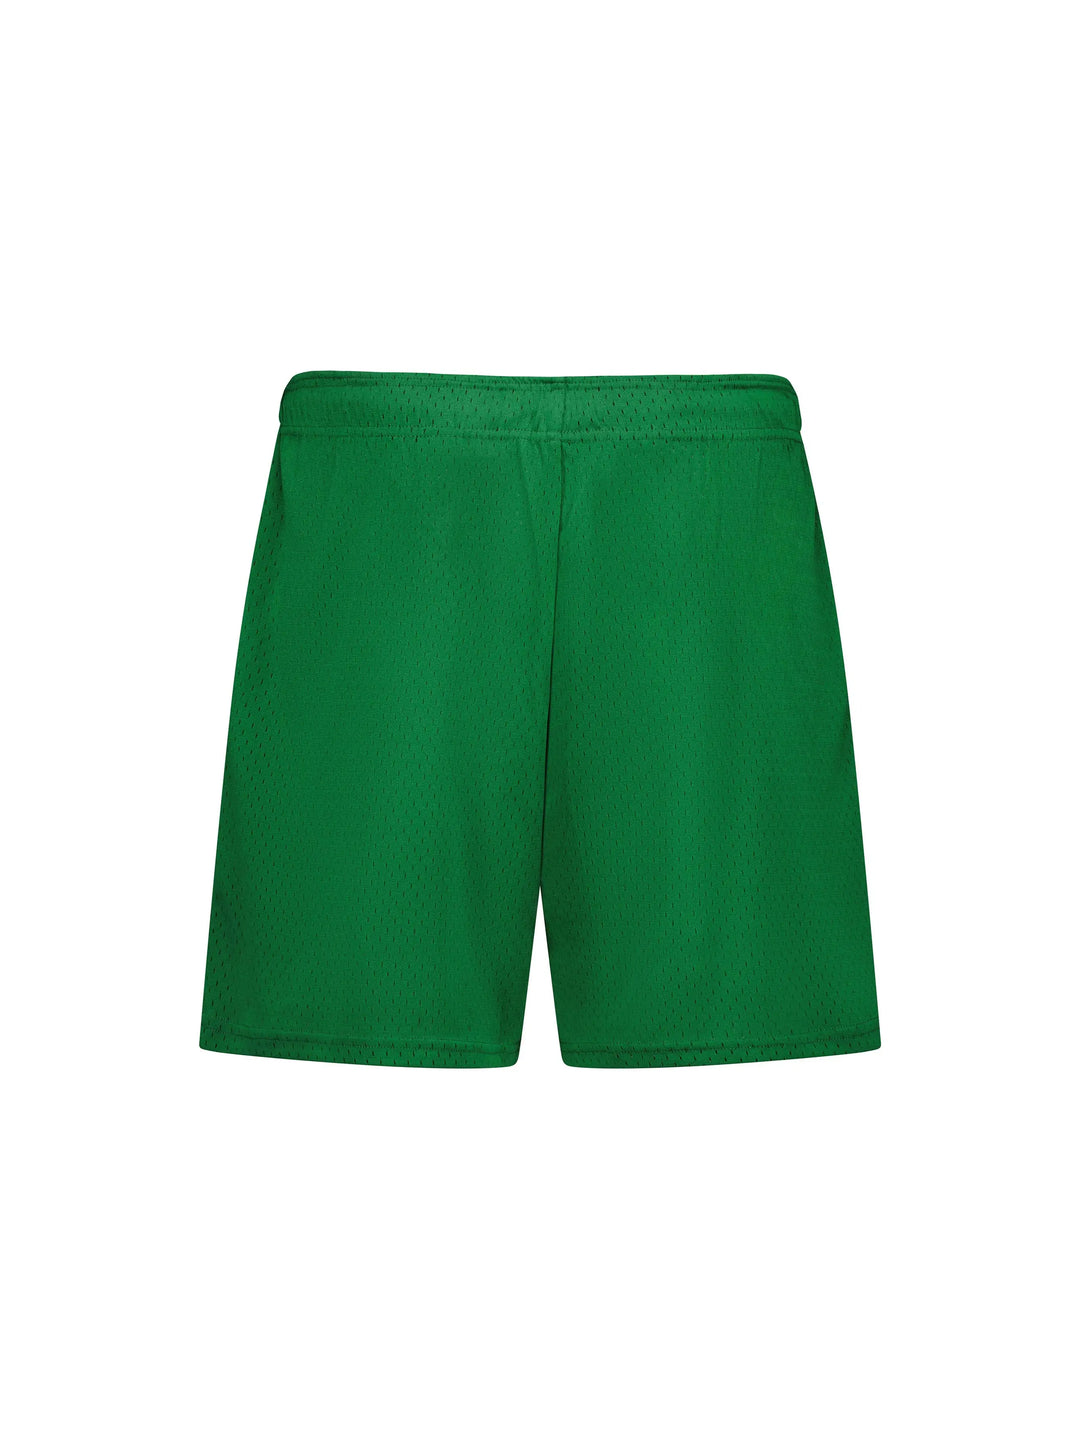 CORE Essential Mesh Shorts Green in Auckland, New Zealand - Shop name